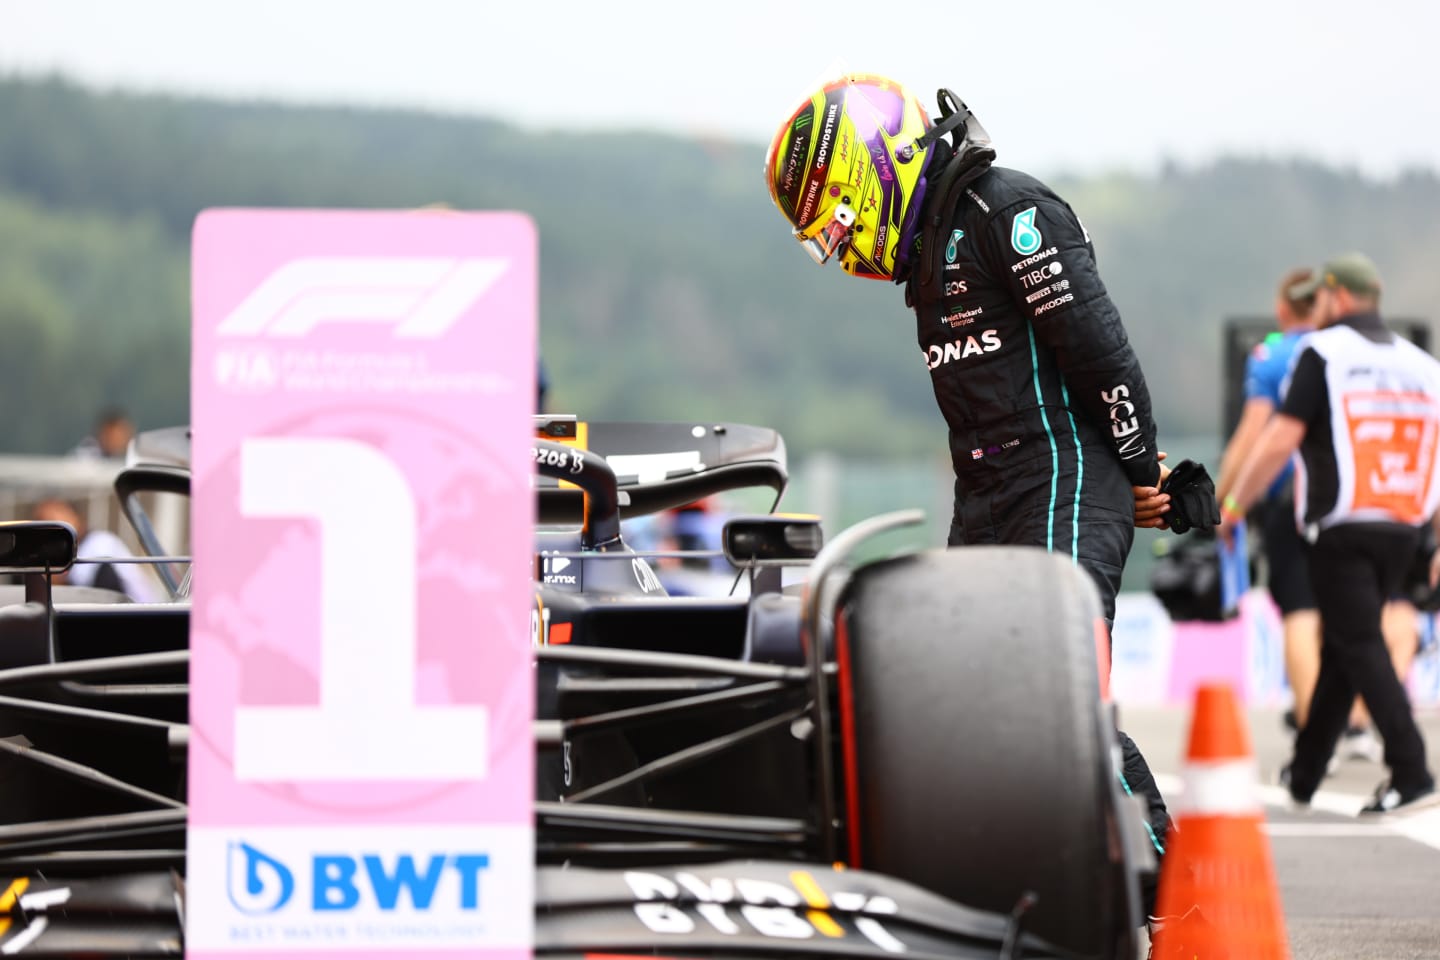 SPA, BELGIUM - AUGUST 27: 7th place qualifier Lewis Hamilton of Great Britain and Mercedes inspects the car of Max Verstappen of the Netherlands and Oracle Red Bull Racing in parc ferme during qualifying ahead of the F1 Grand Prix of Belgium at Circuit de Spa-Francorchamps on August 27, 2022 in Spa, Belgium. (Photo by Mark Thompson/Getty Images)